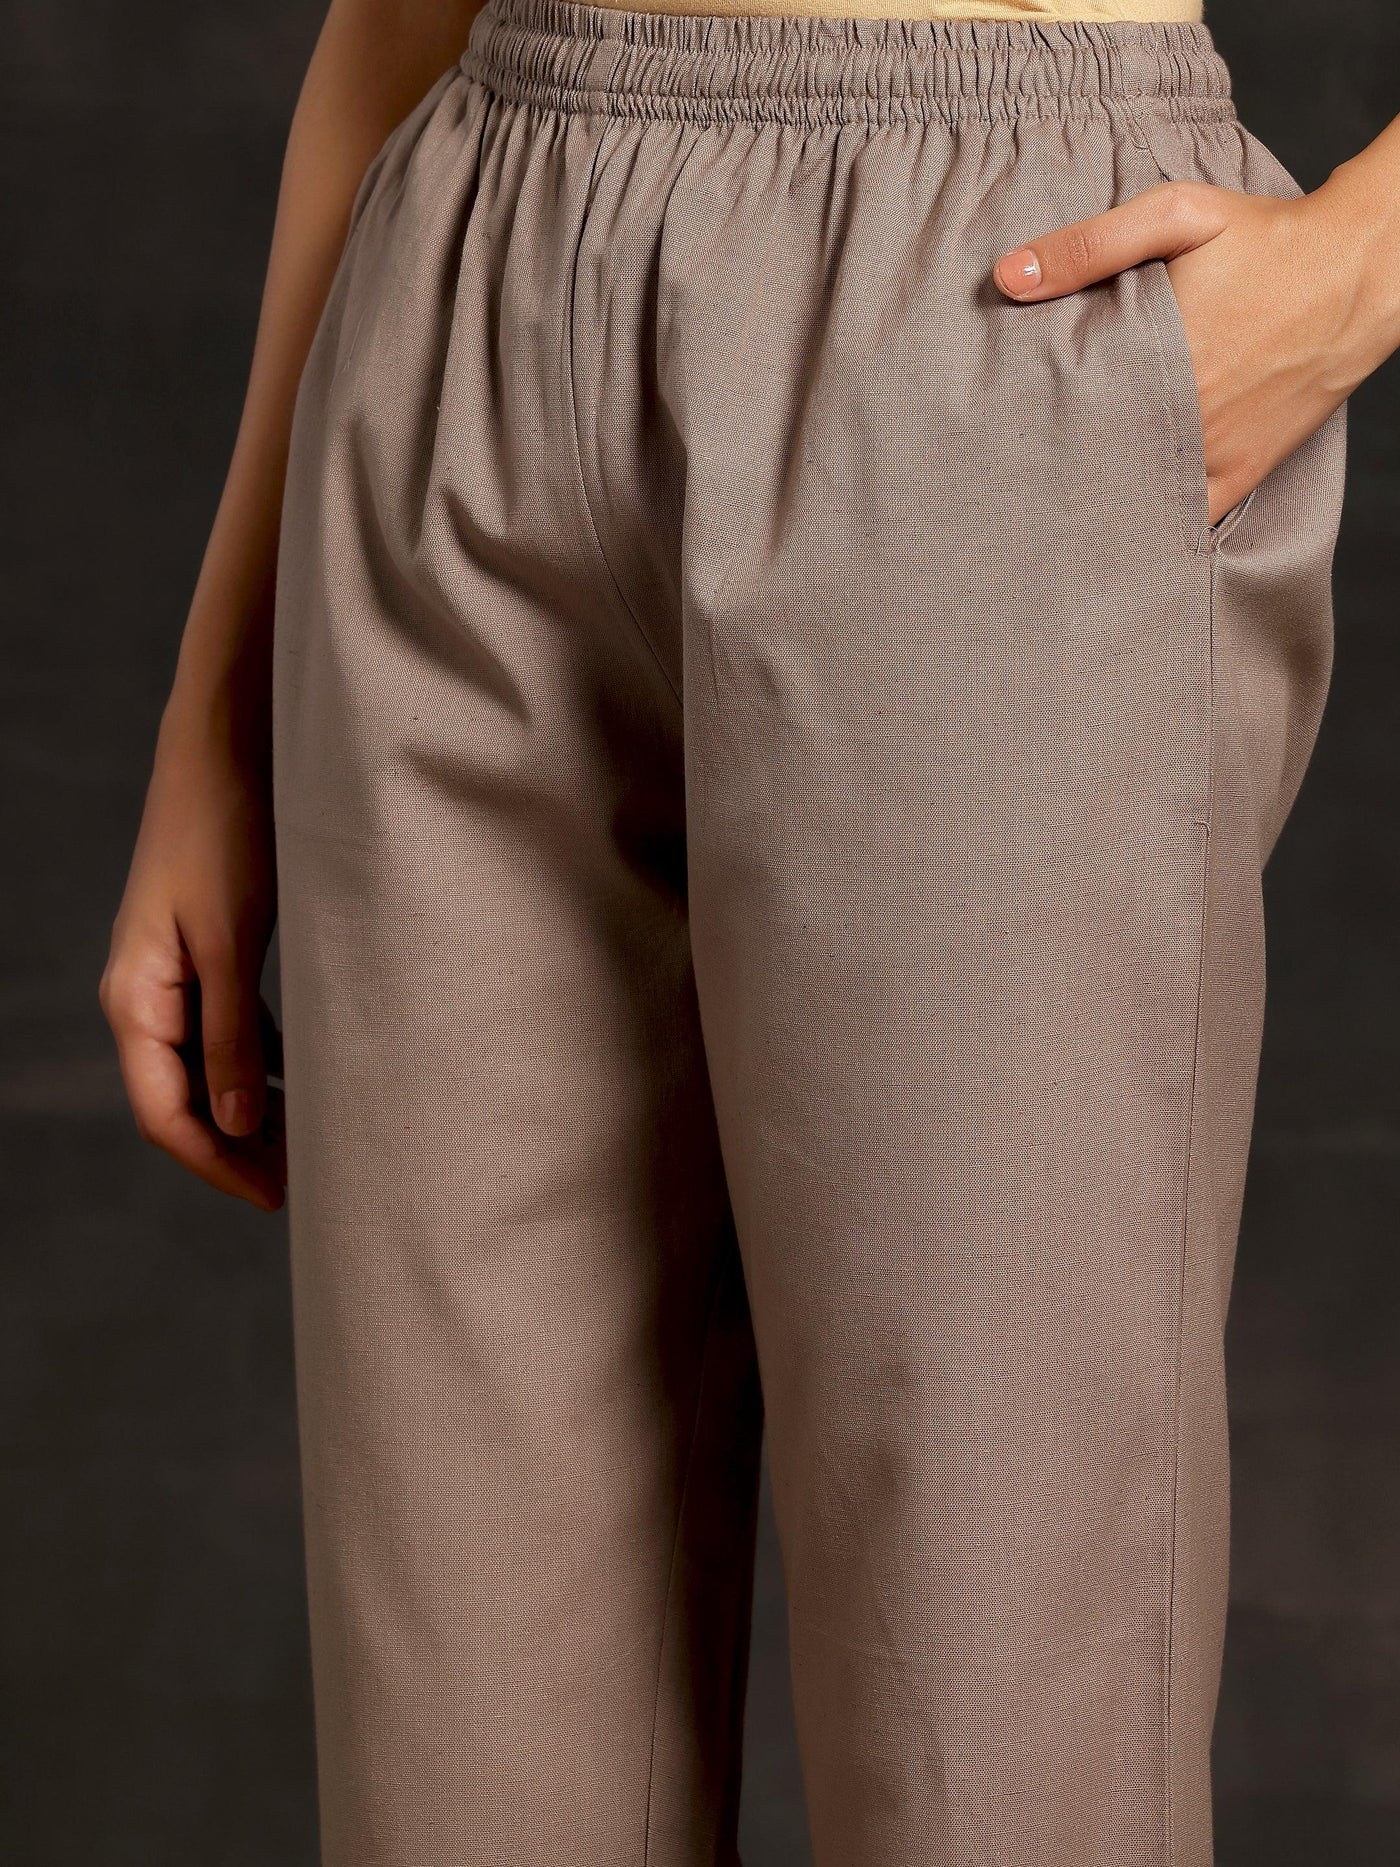 Grey Solid Cotton Straight Fit Trousers - Libas